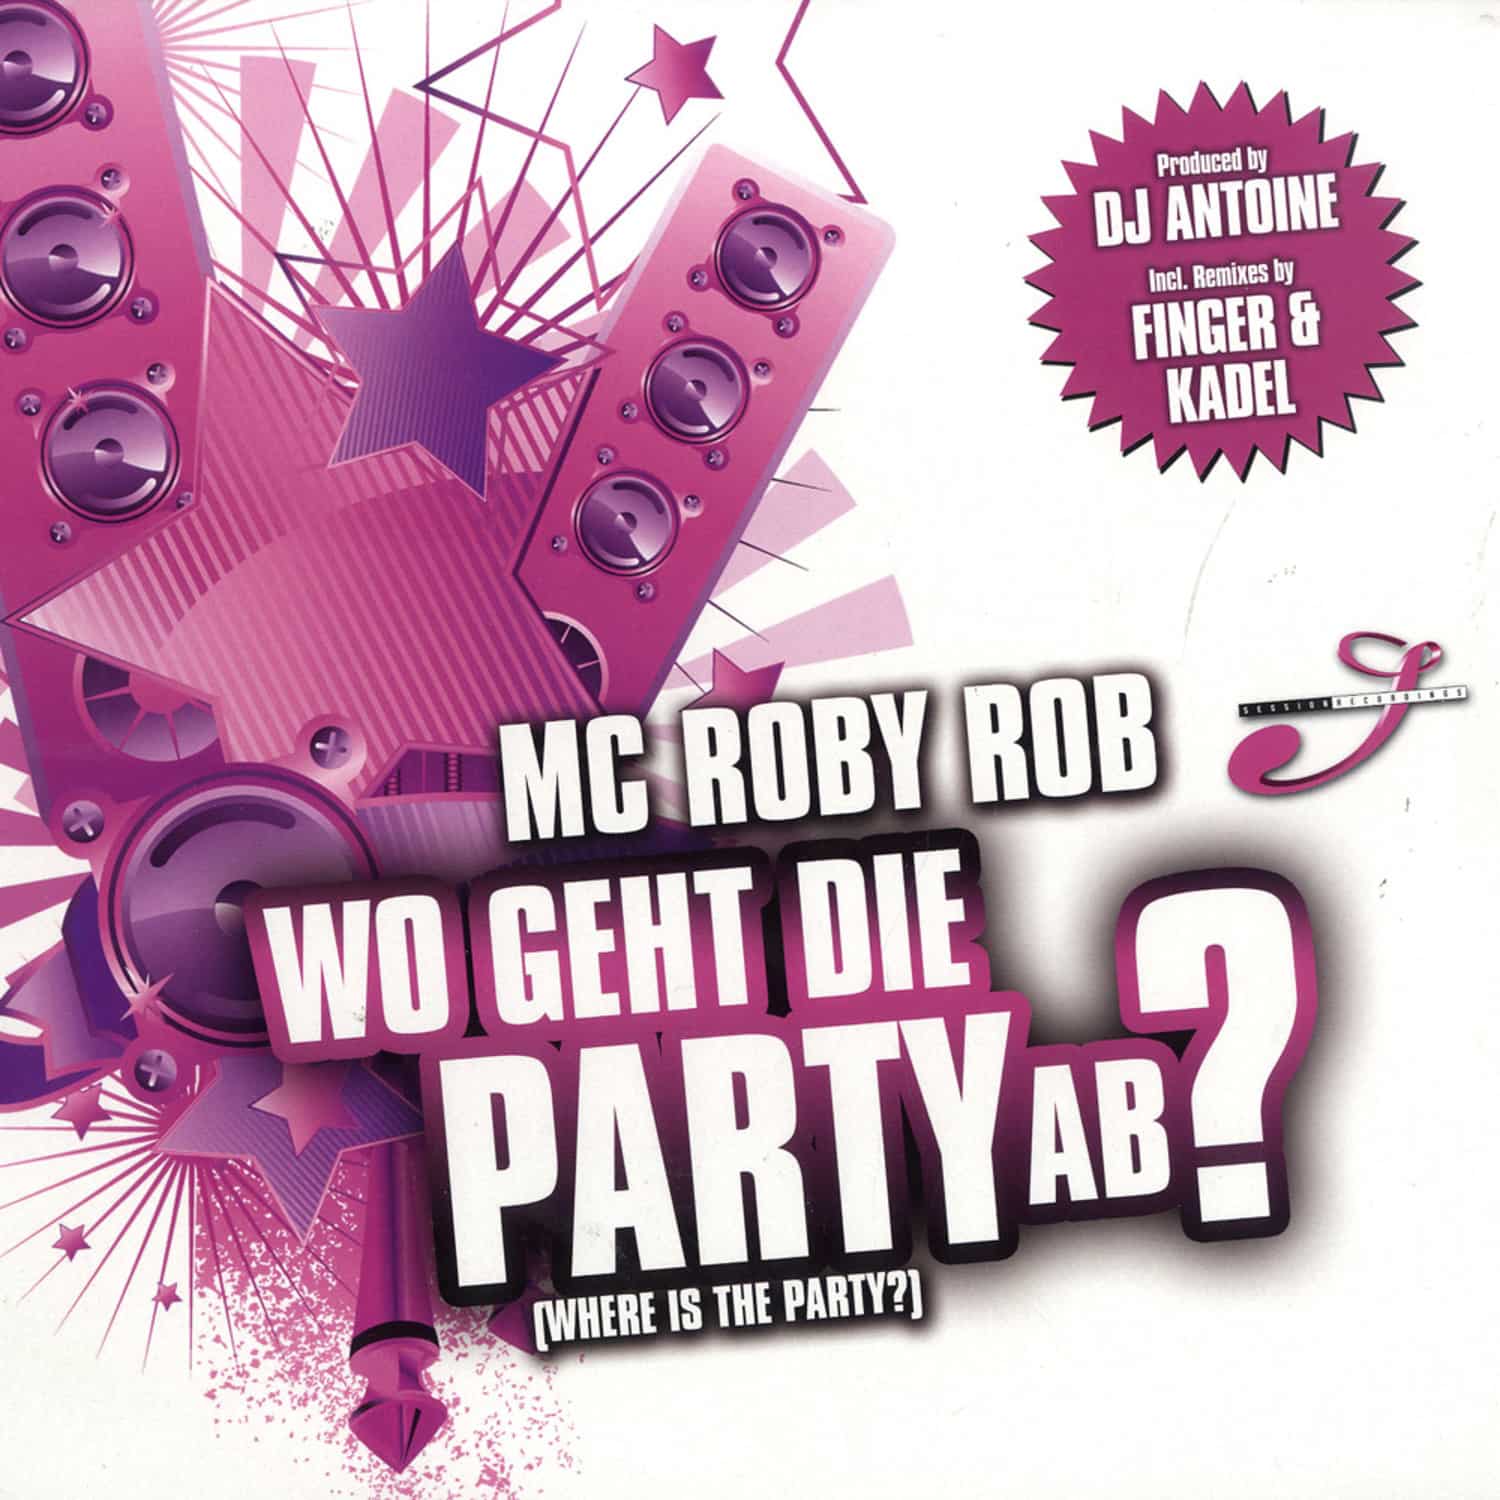 Mc Roby Rob - WO GEHT DIE PARTY AB/WHERE IS THE PARTY?